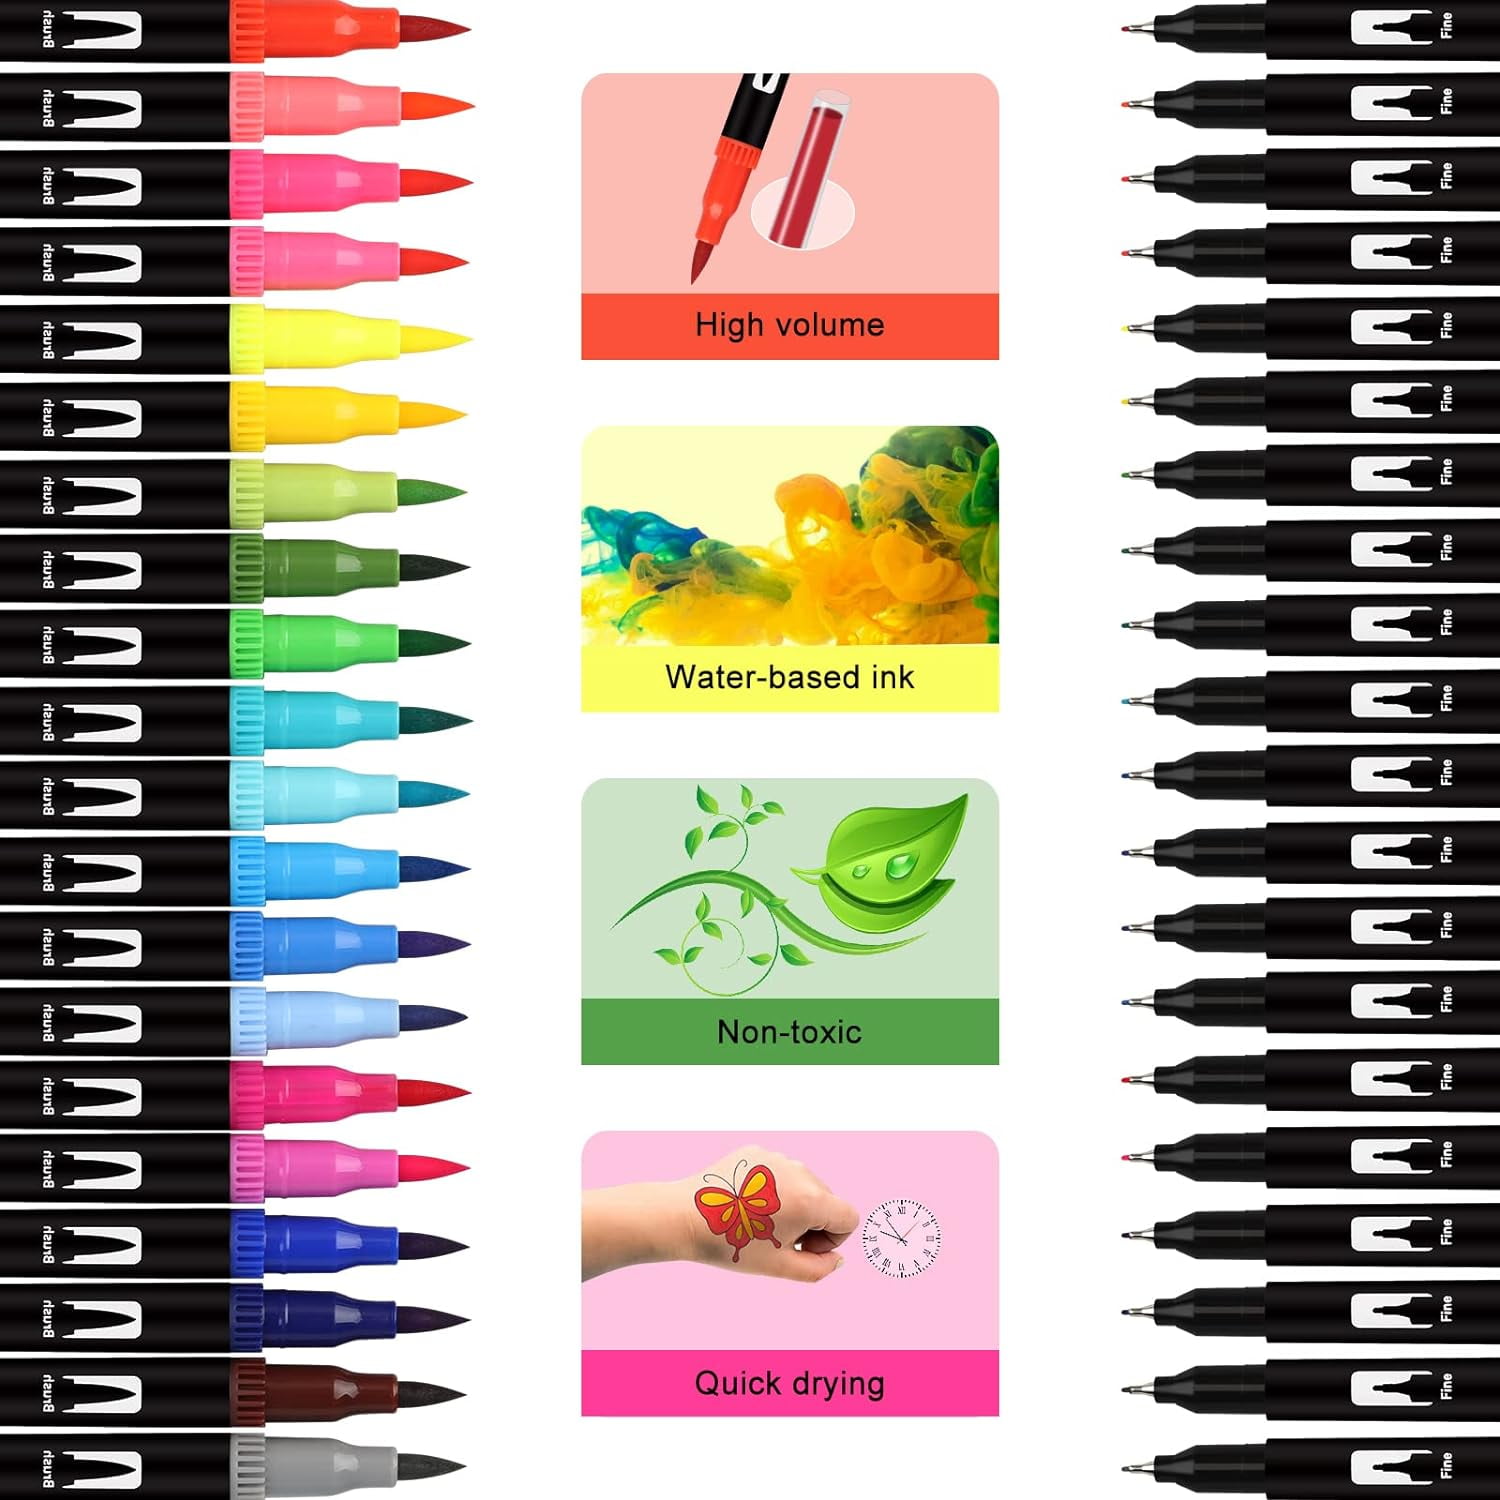 JEFFNIUB Dual Brush Markers Pens 24 Colors, No Bleed Caligraphy Markers for  Adult Coloring Book, Lettering, Drawing, Watercolor